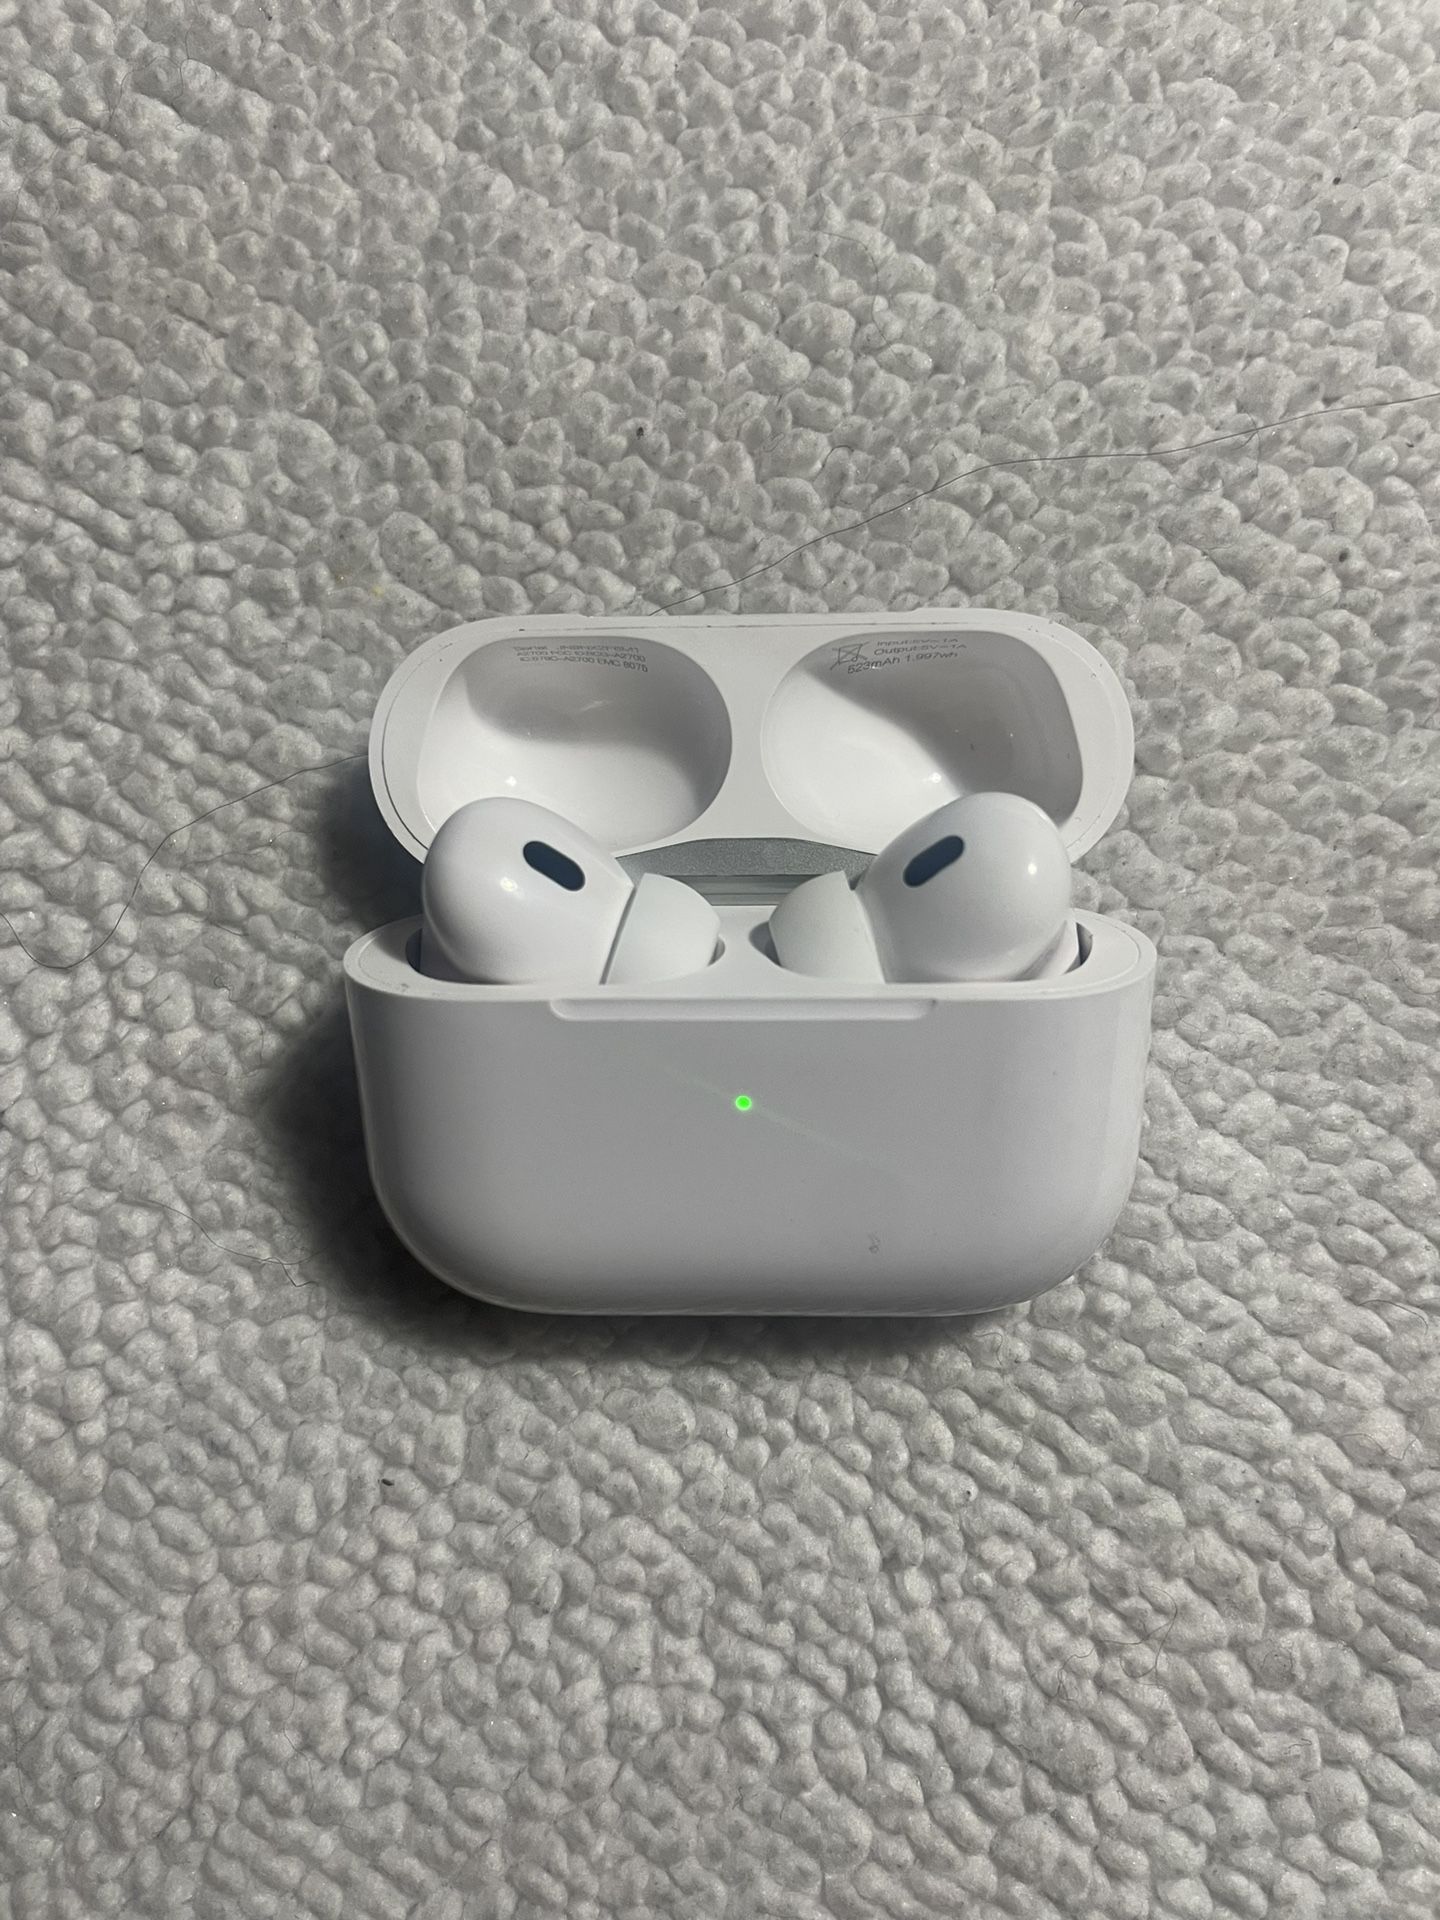 AirPods Pros 